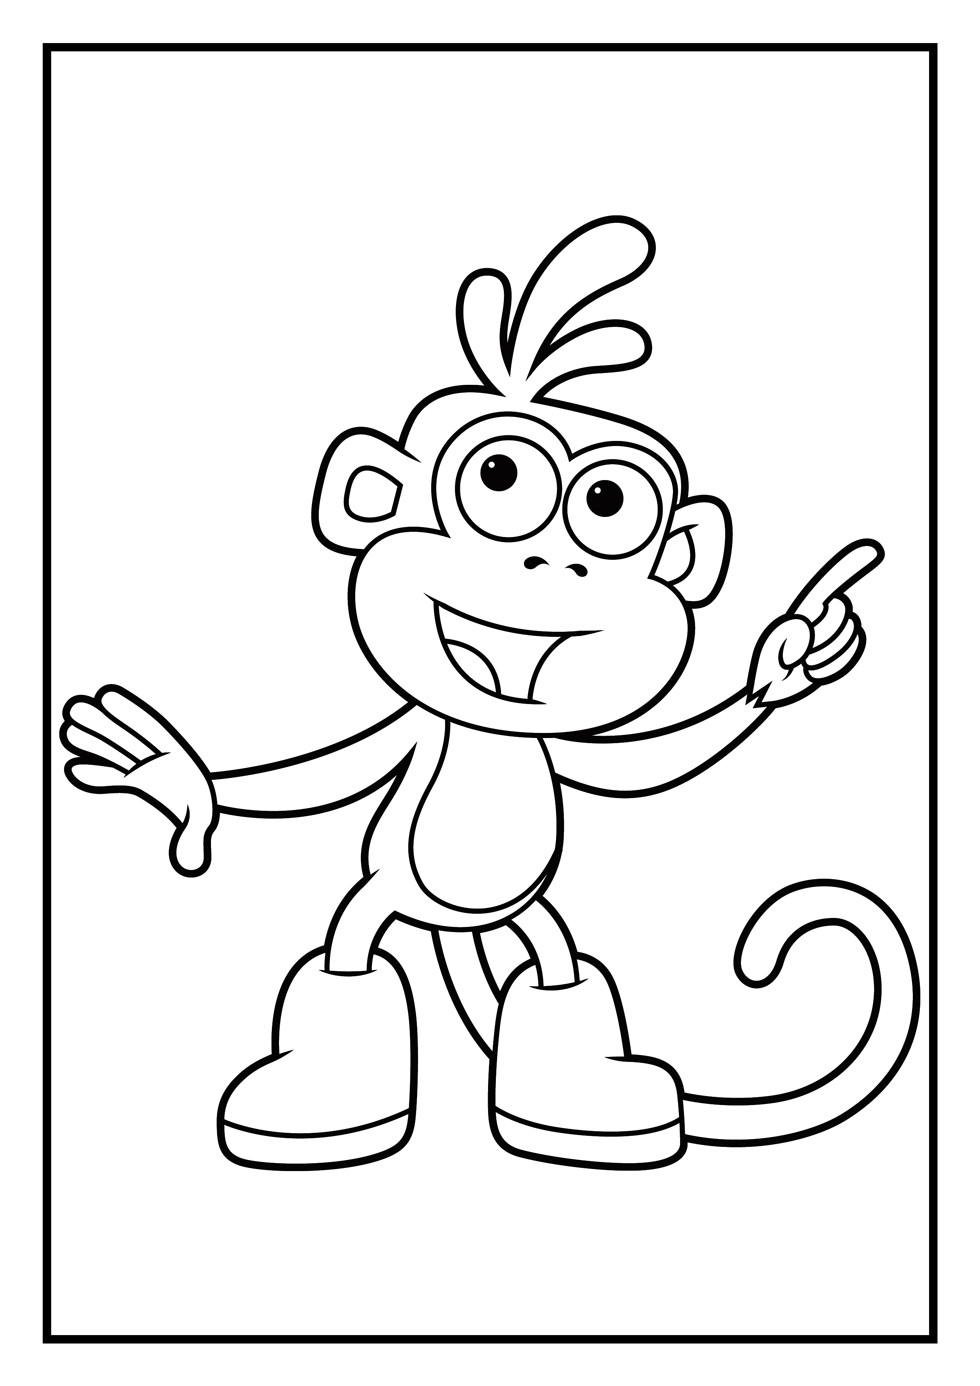 Girlsgogames Coloring Pages
 Dora go boots coloring pages